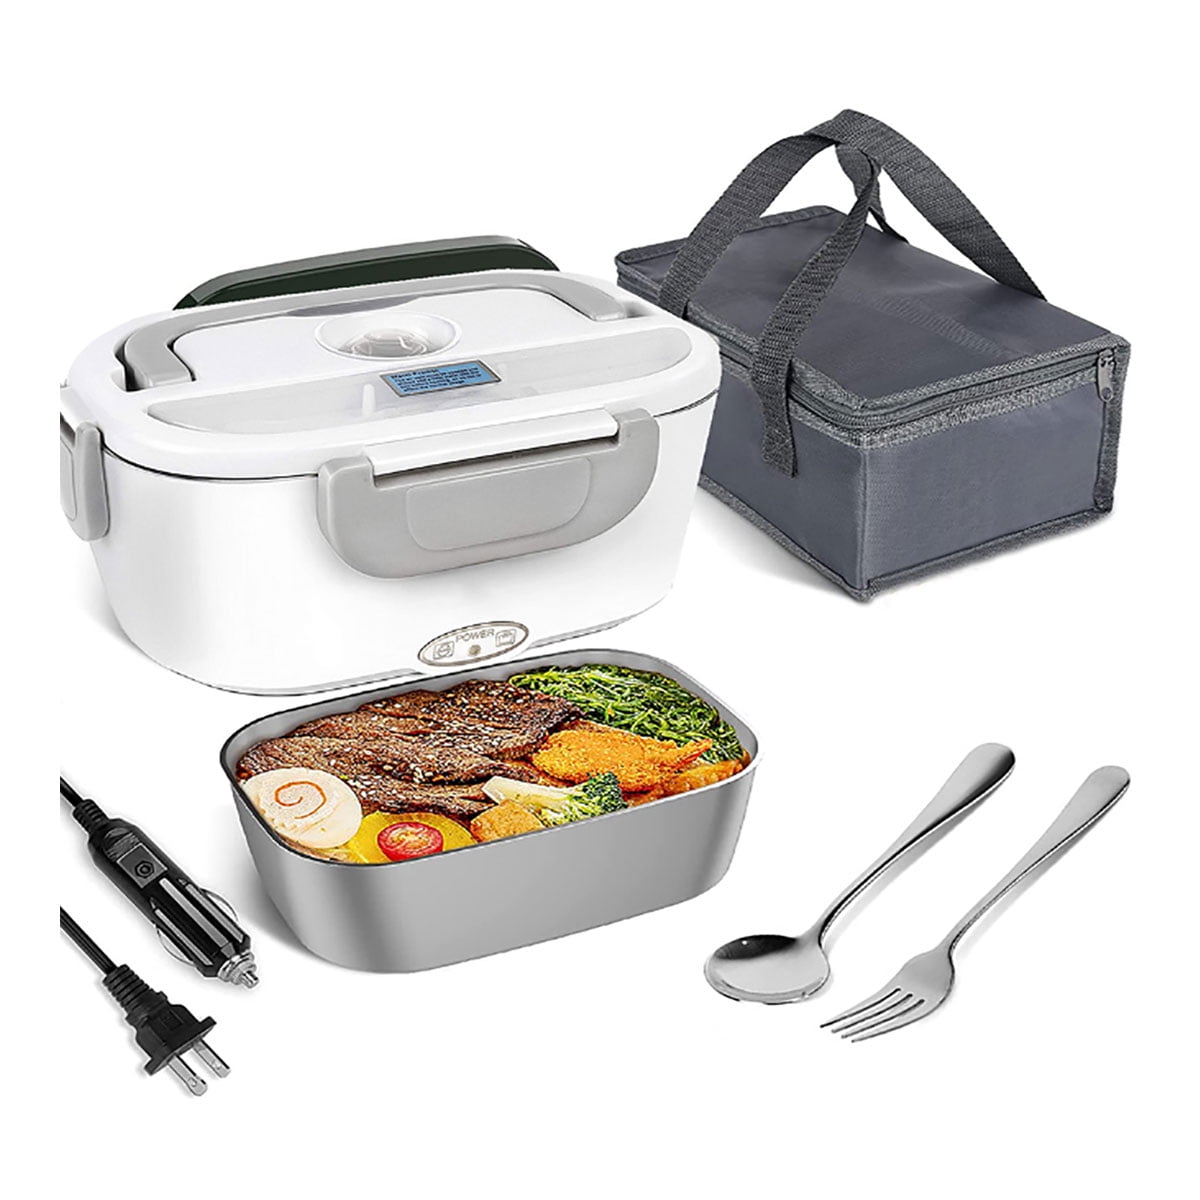 Stainless Steel Dual Use Electric Lunchbox  For School, Car, Picnic  220V/110V, 24V & 12V Food Heater & Warmer Container 221022 From Ning010,  $27.69